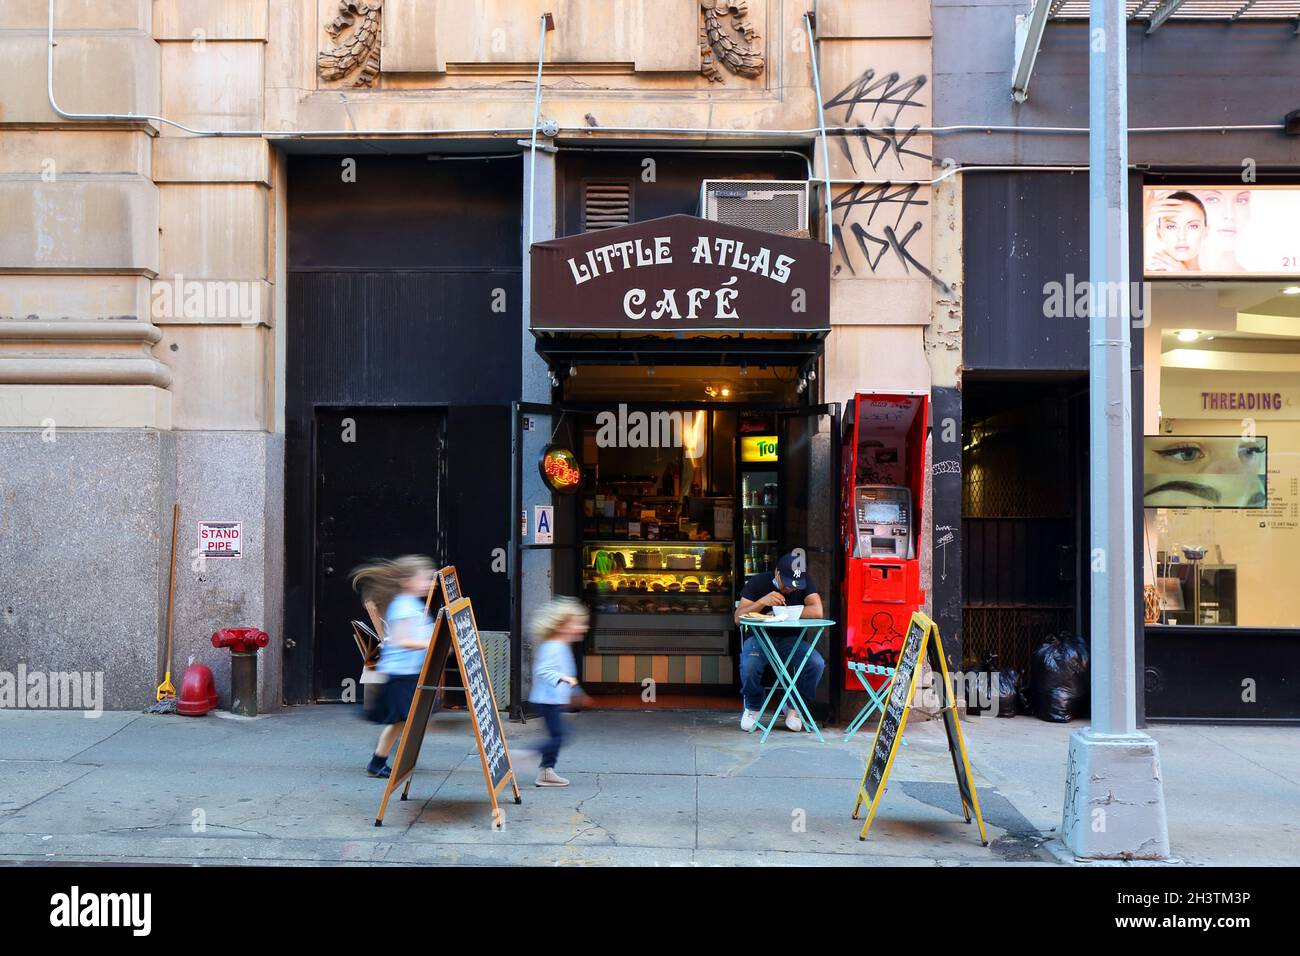 Little Atlas Cafe, 6 West 4th Street, New York, NYC storefront photo of a tiny cafe and eatery near New York University. Stock Photo